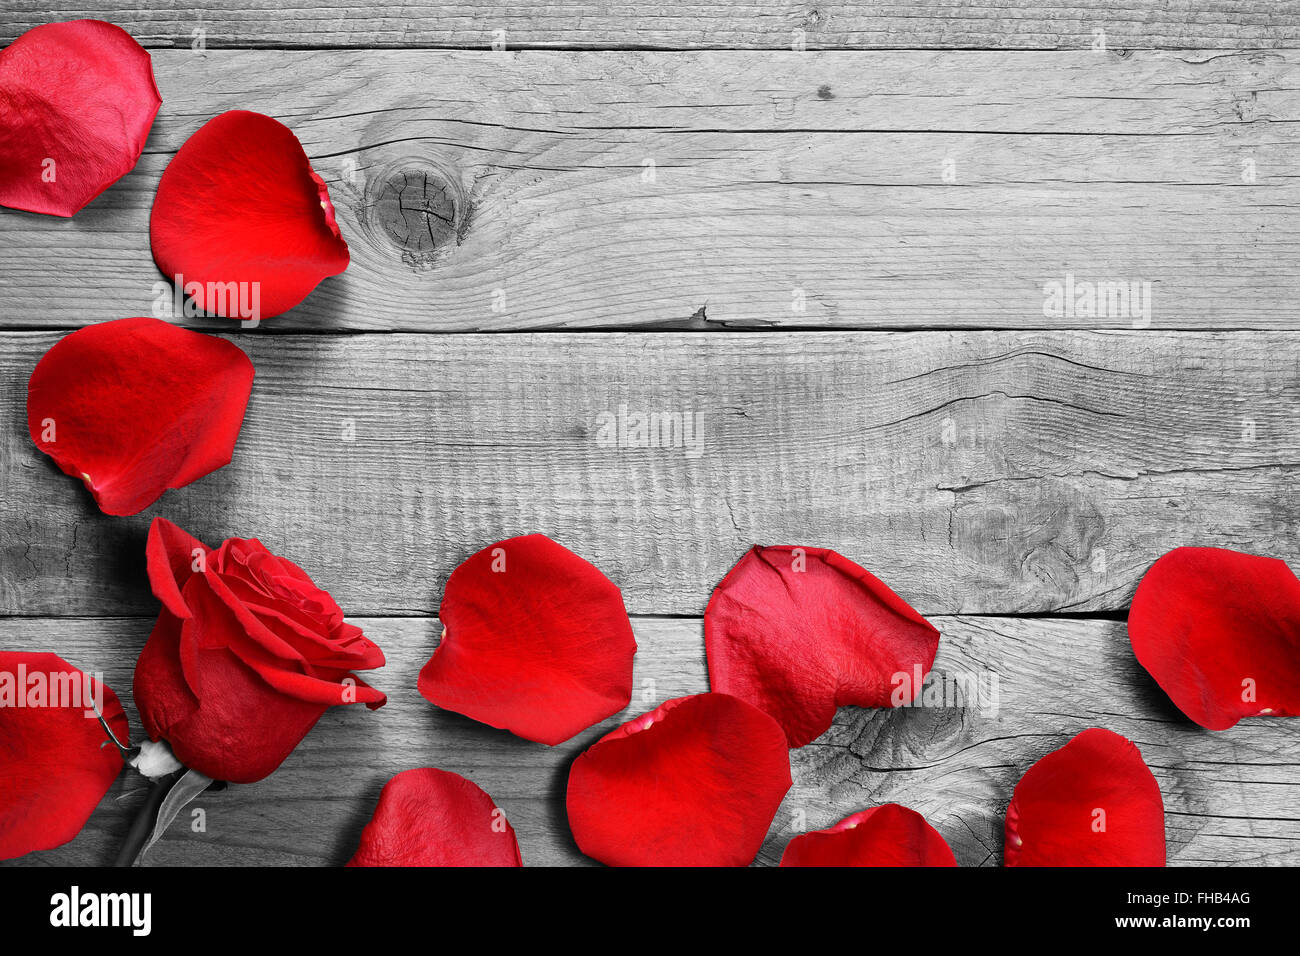 Red Rose And Petals On Black And White Wooden Background Stock